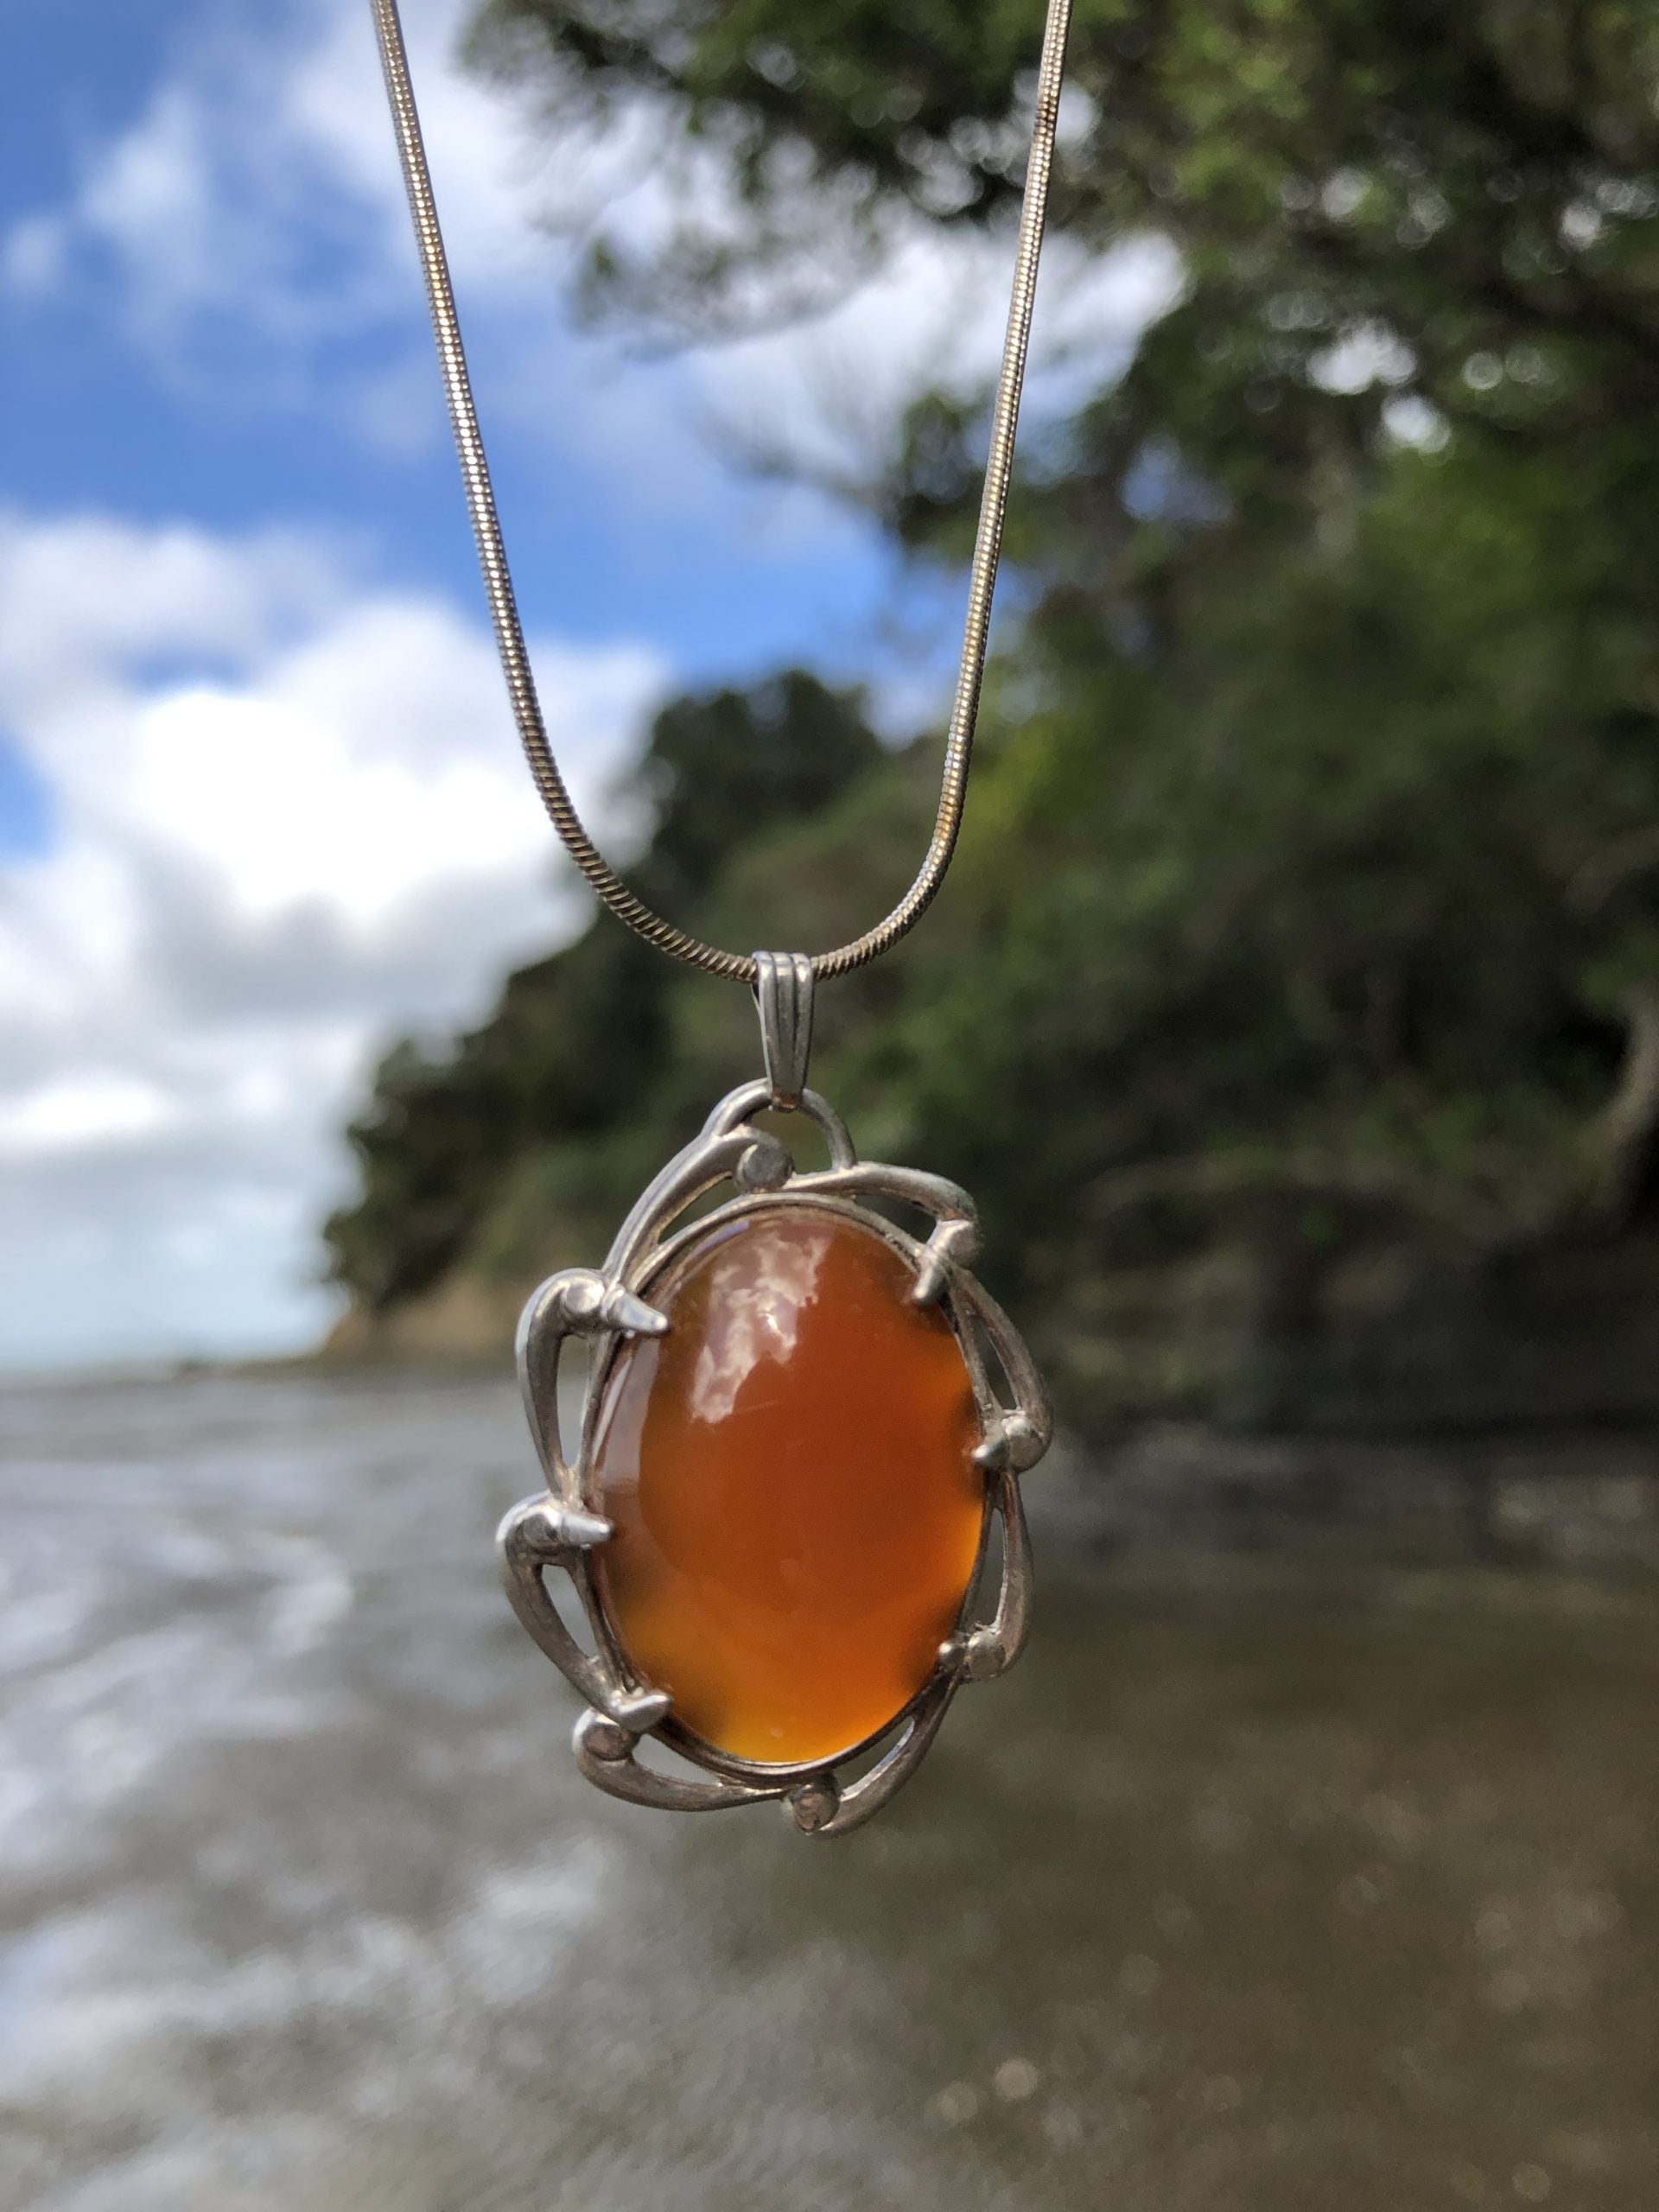 Necklace with a flawless caramel orange New Zealand Carnelian, hand polished to a 25x18mm cabochon and set in a sterling silver setting with a 20 inch sterling silver snake chain, angled